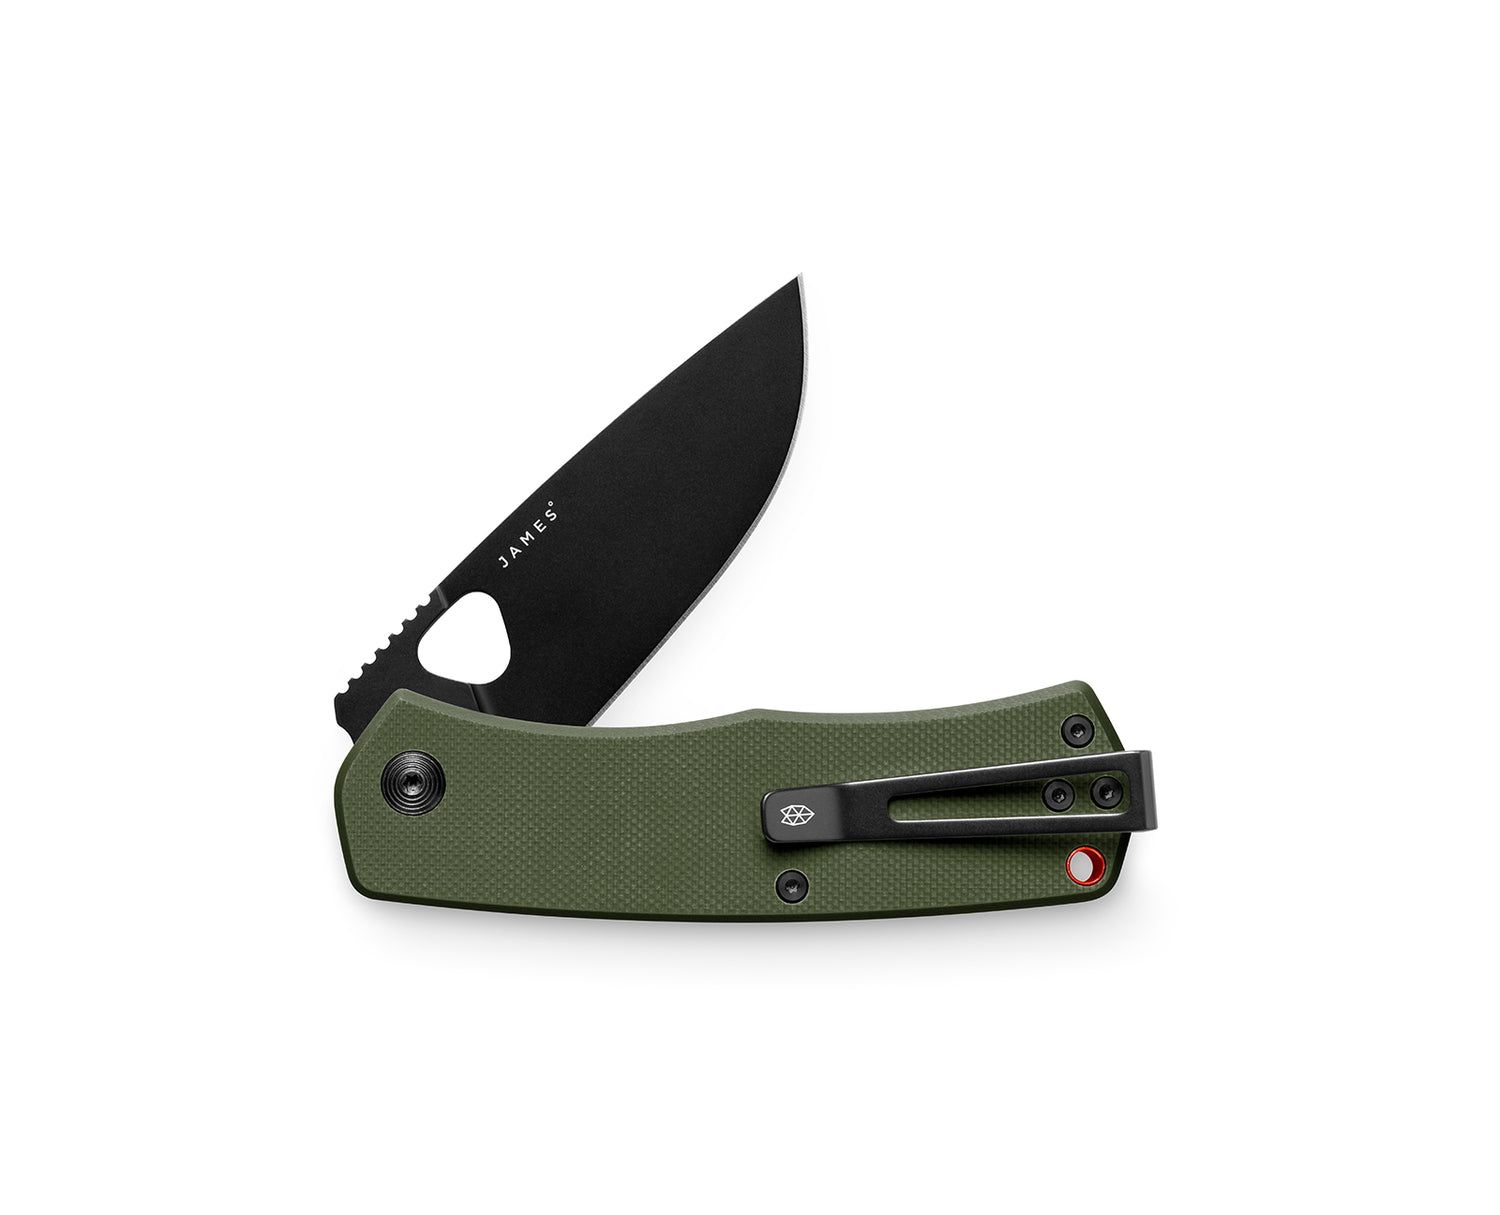 The Folsom knife with OD green and orange case and black blade.